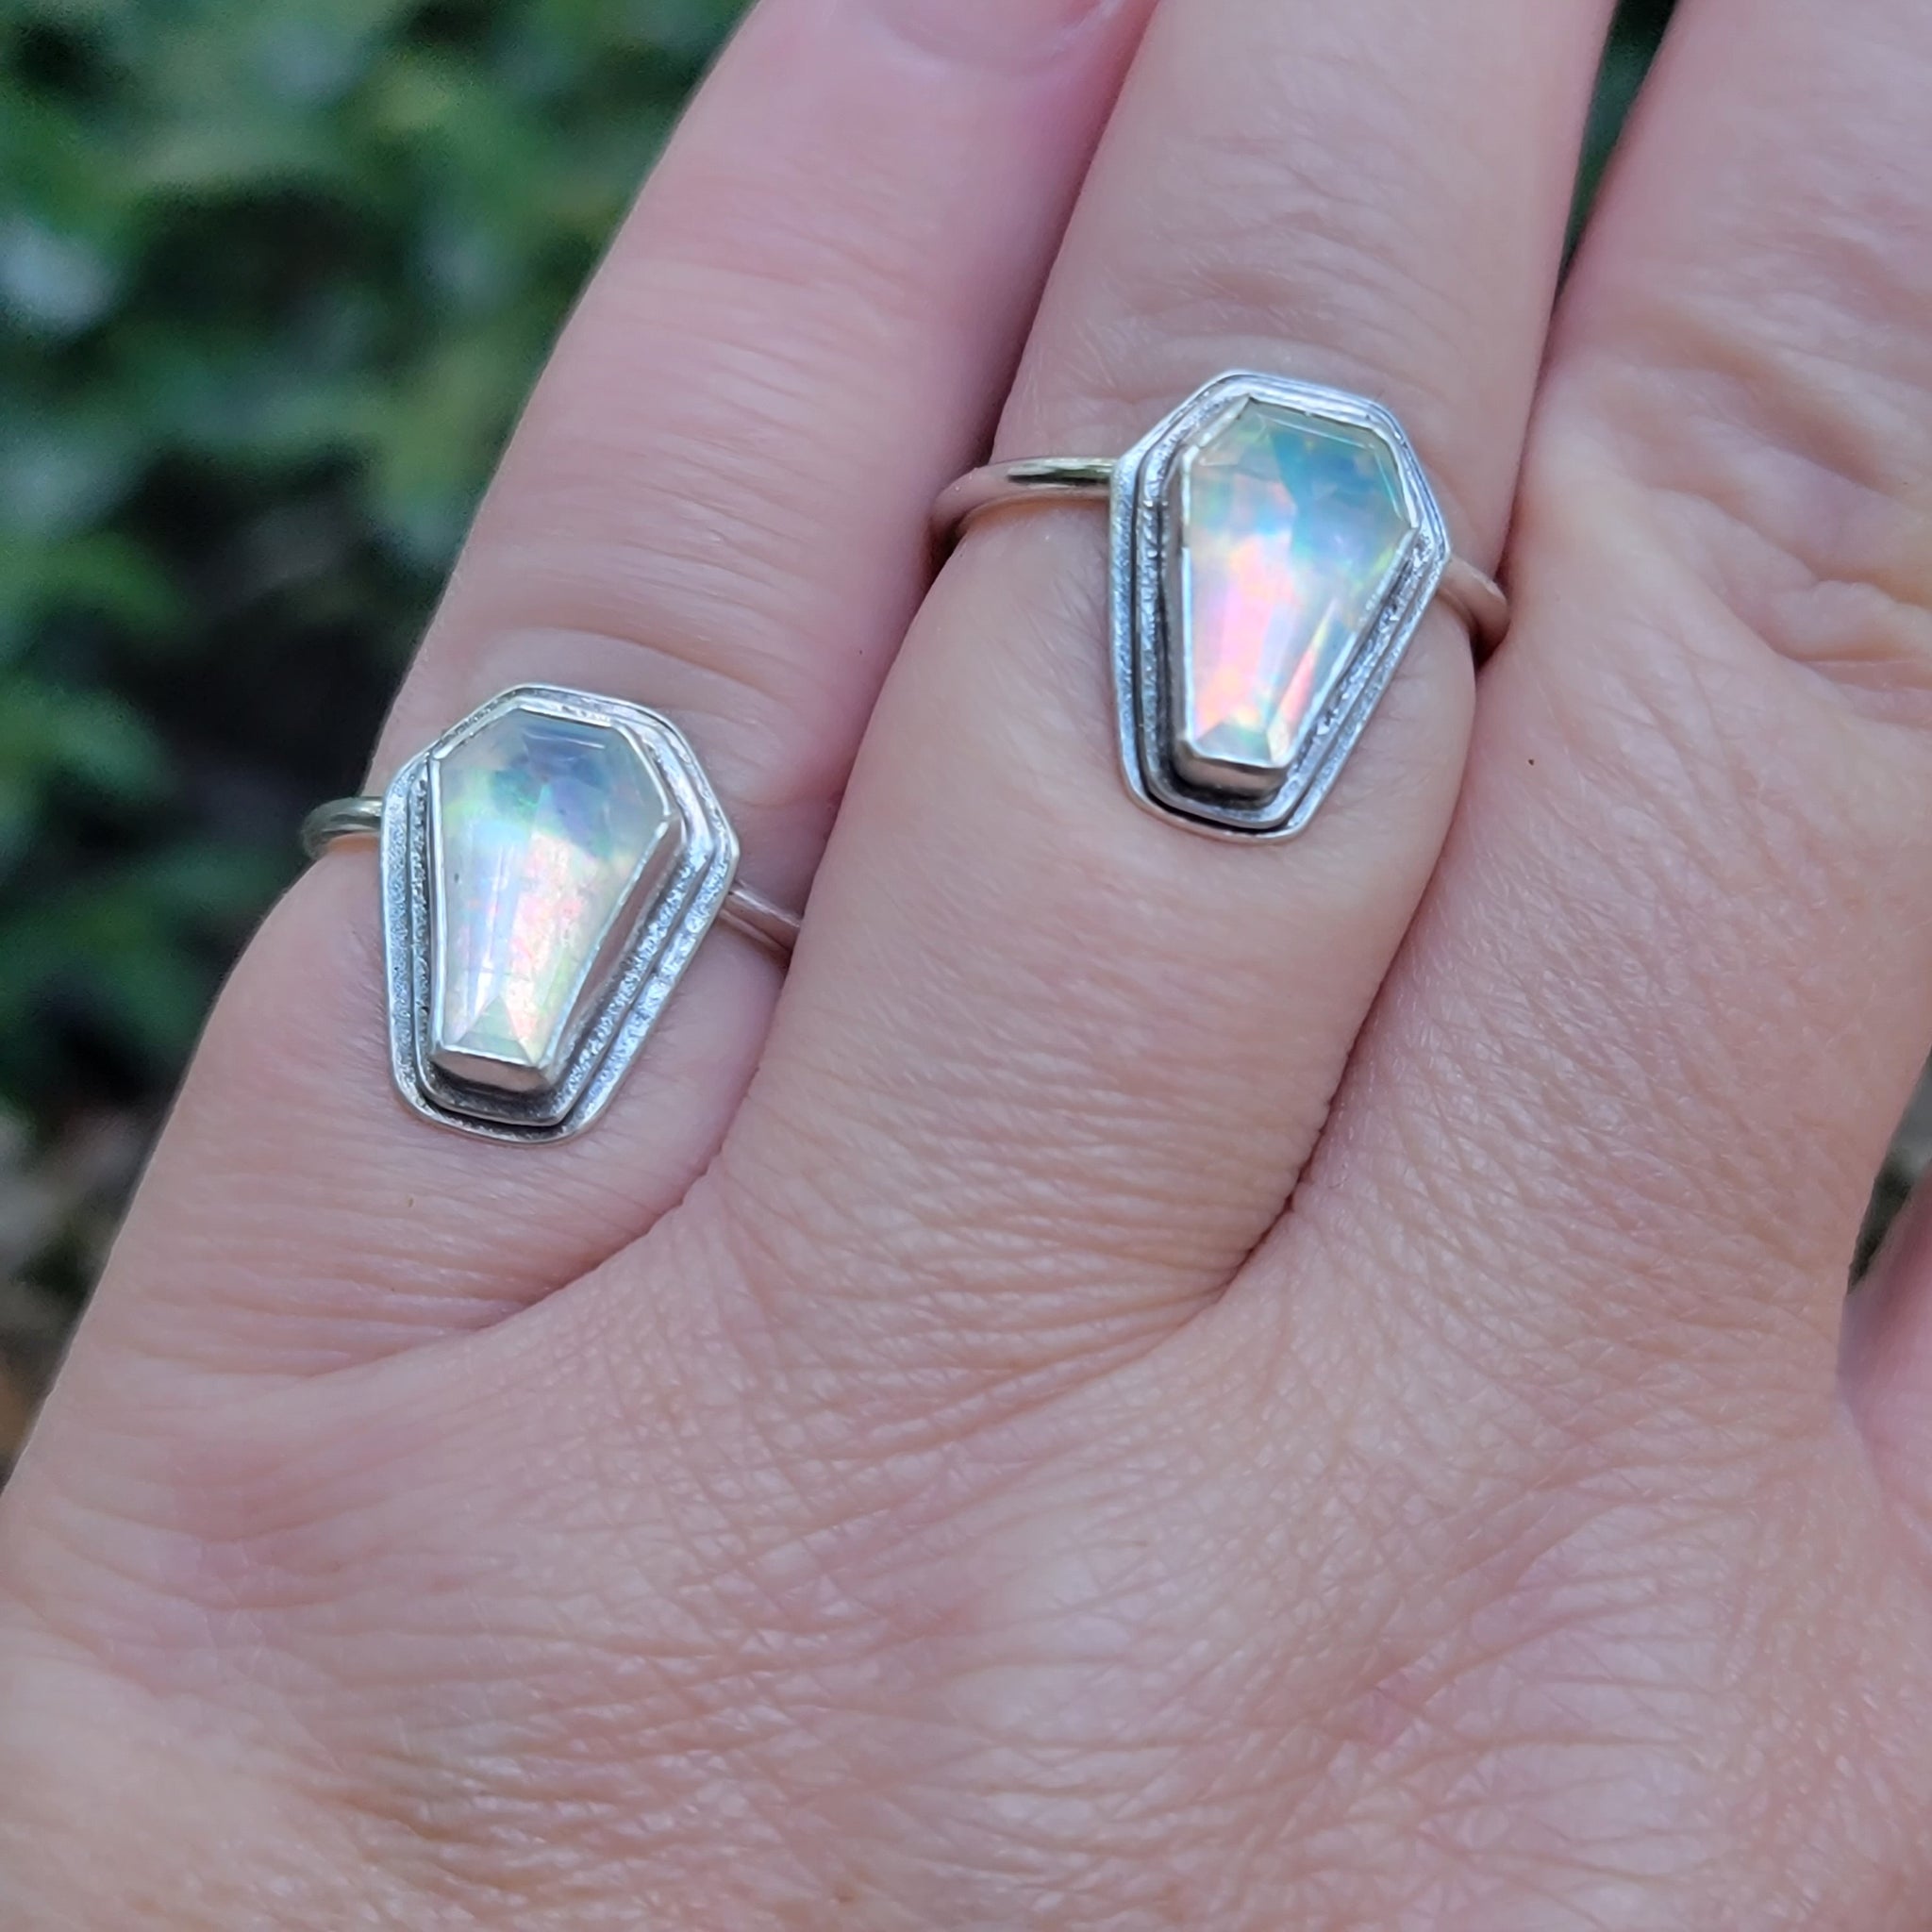 Opal Coffin Rings in Sterling Silver Sizes 7 & 8